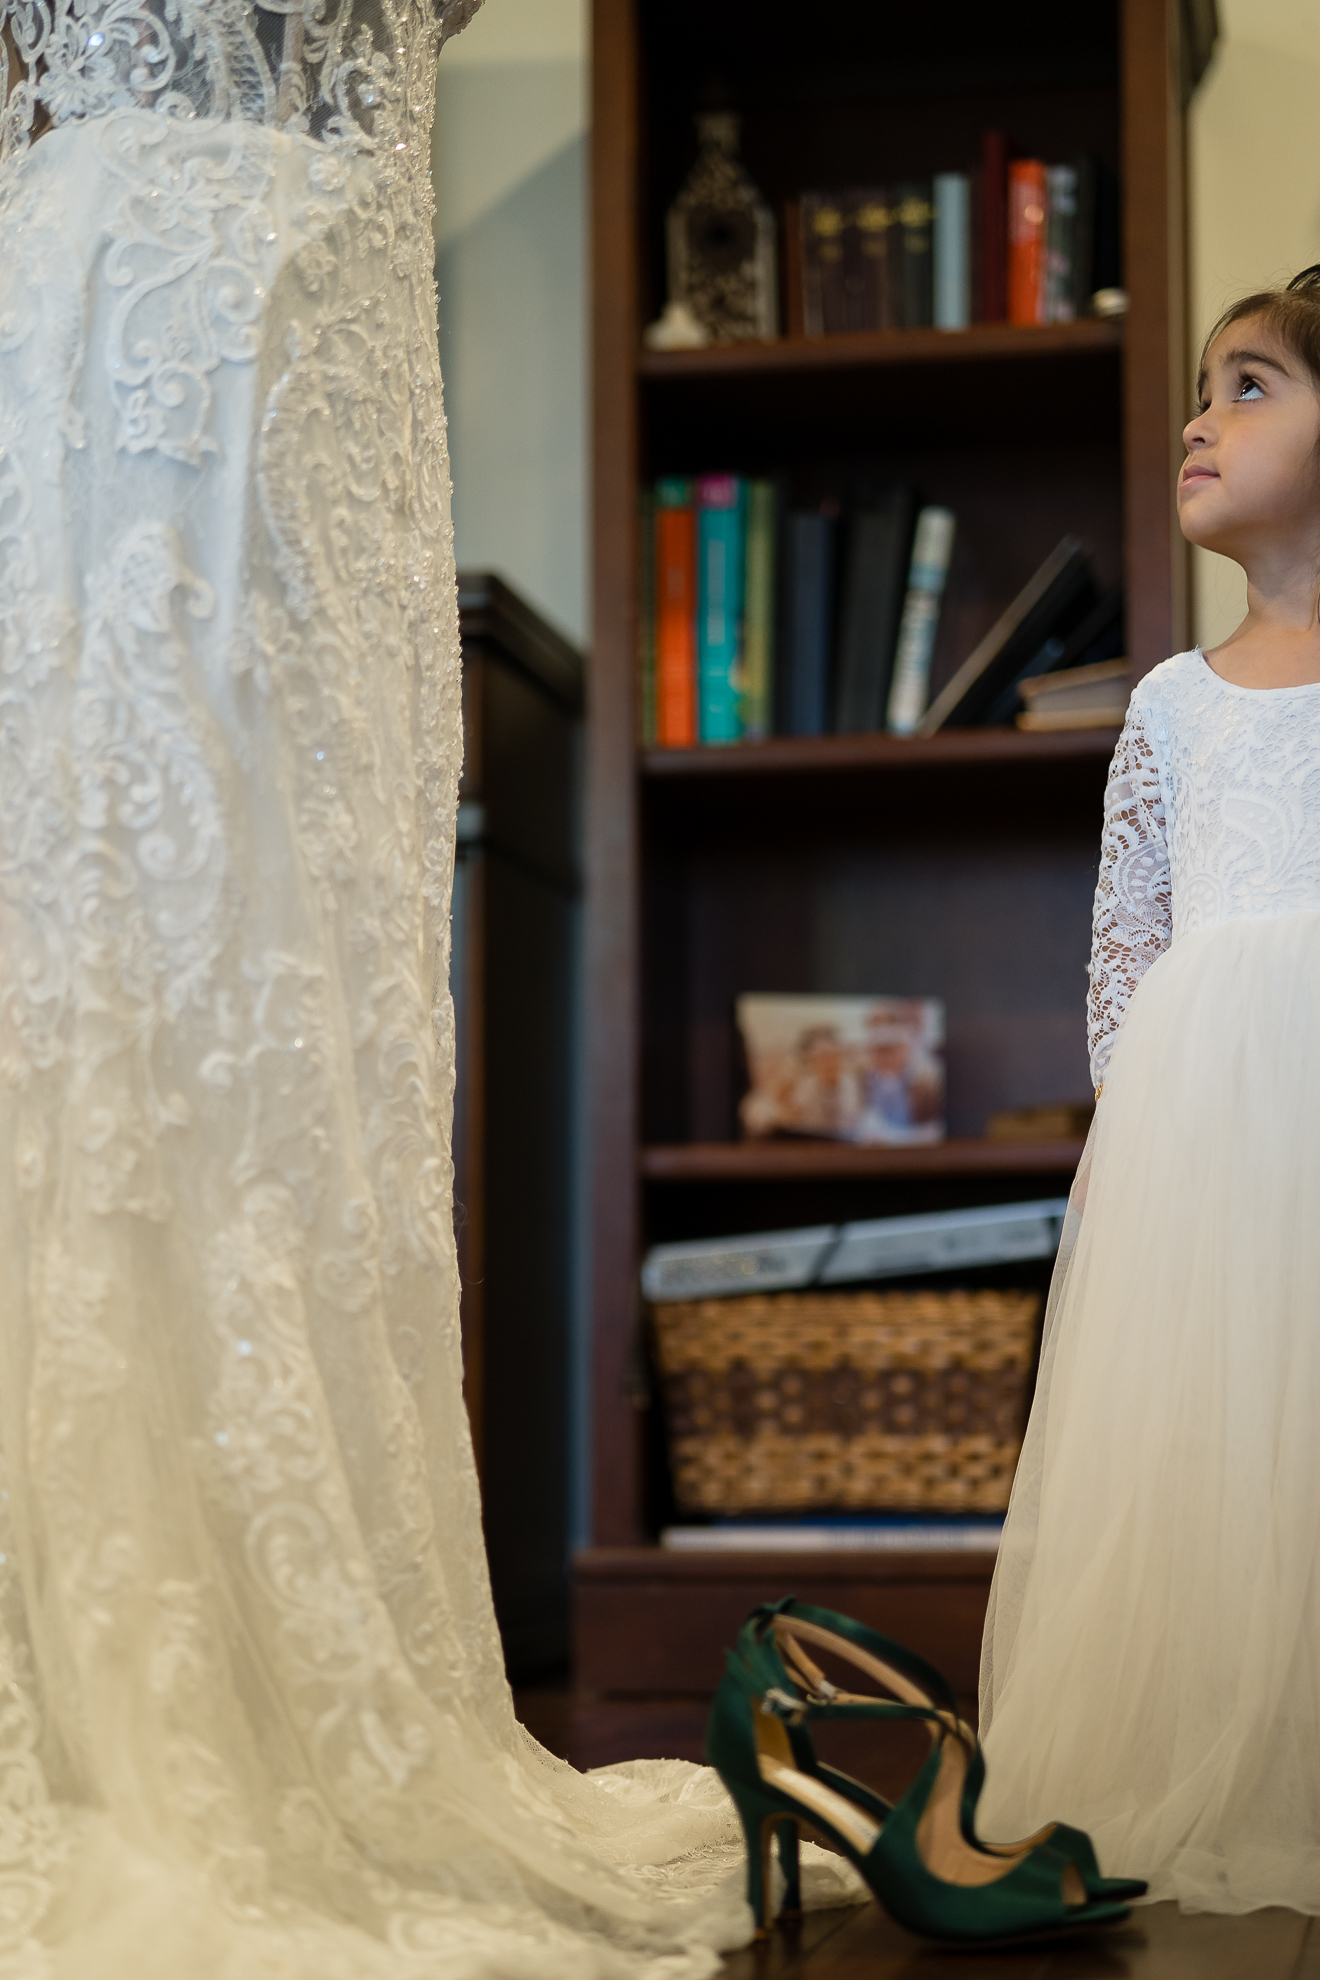 ThomasKim_photography A little girl in a white wedding dress shyly looking at her shoes.